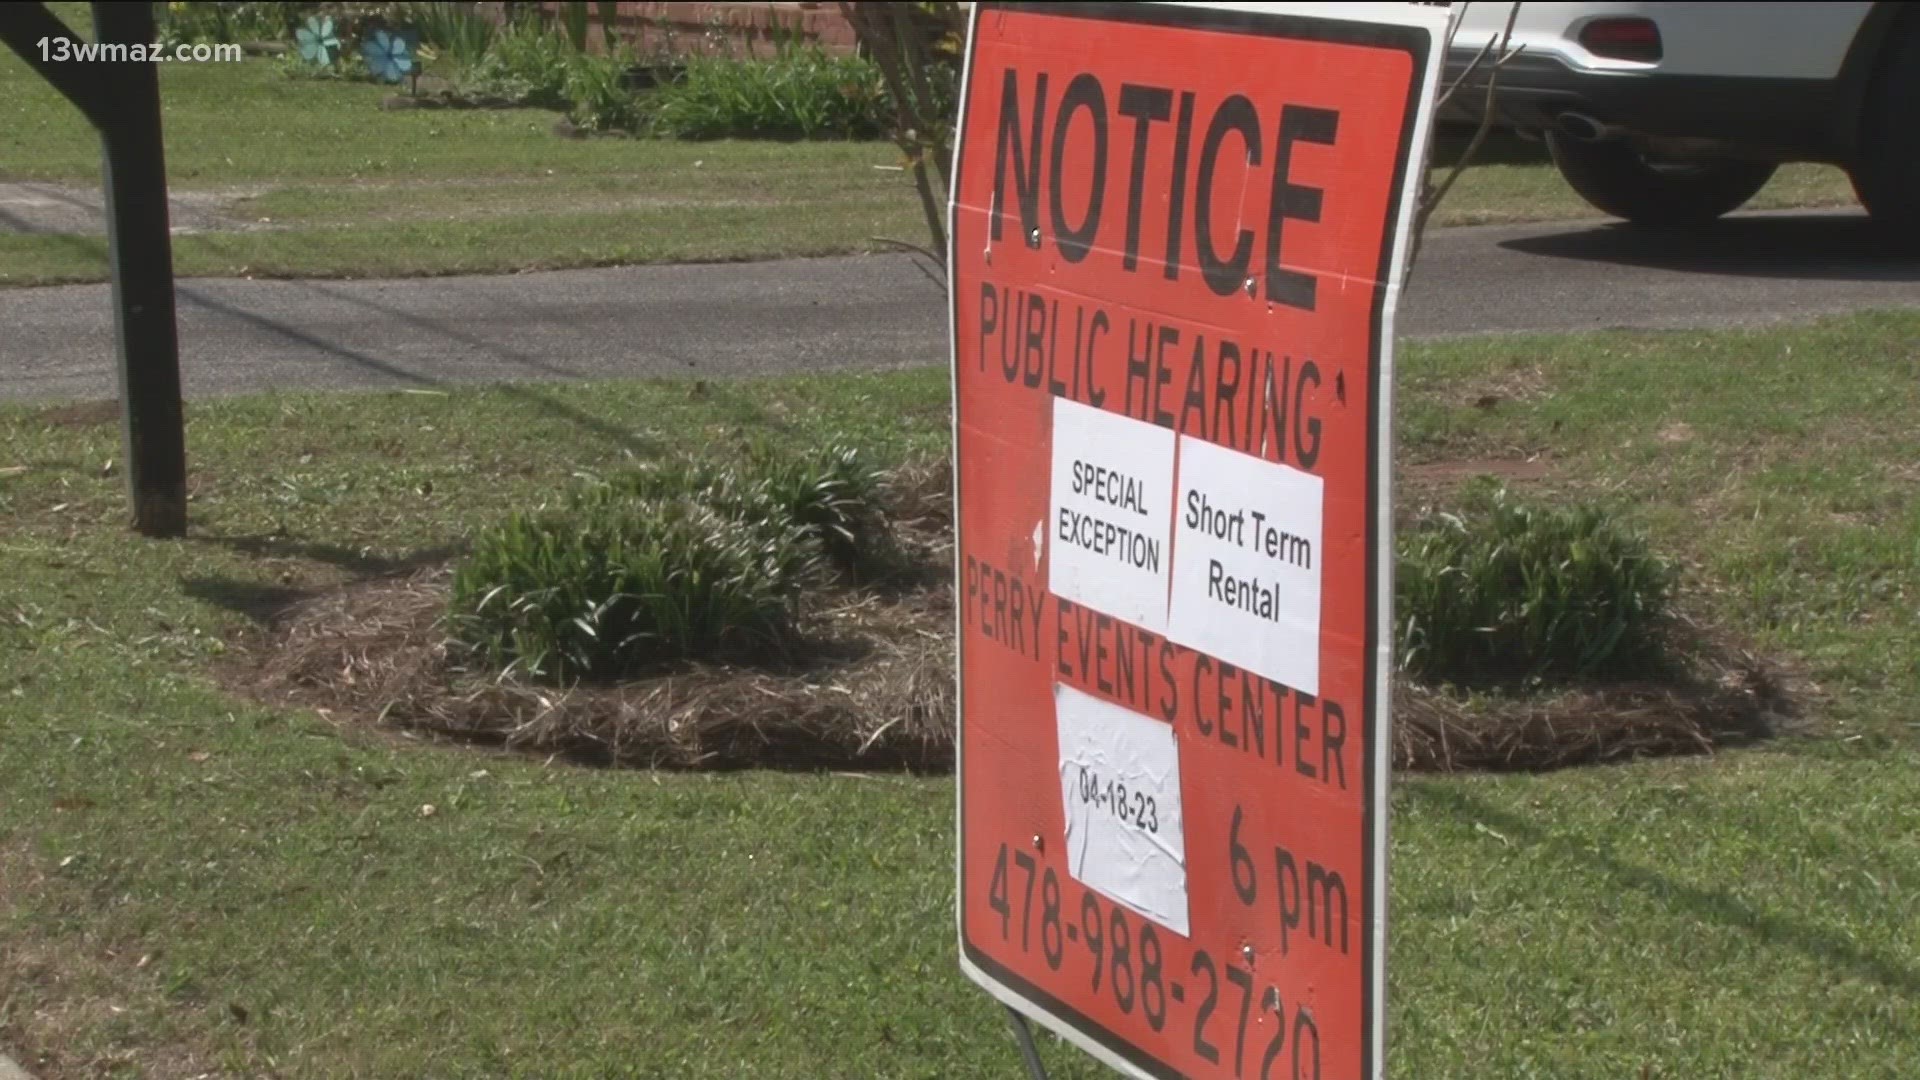 Meetings to discuss the rentals are set for April’s city council agenda, and people will be able to attend and voice their opinion on the housing.